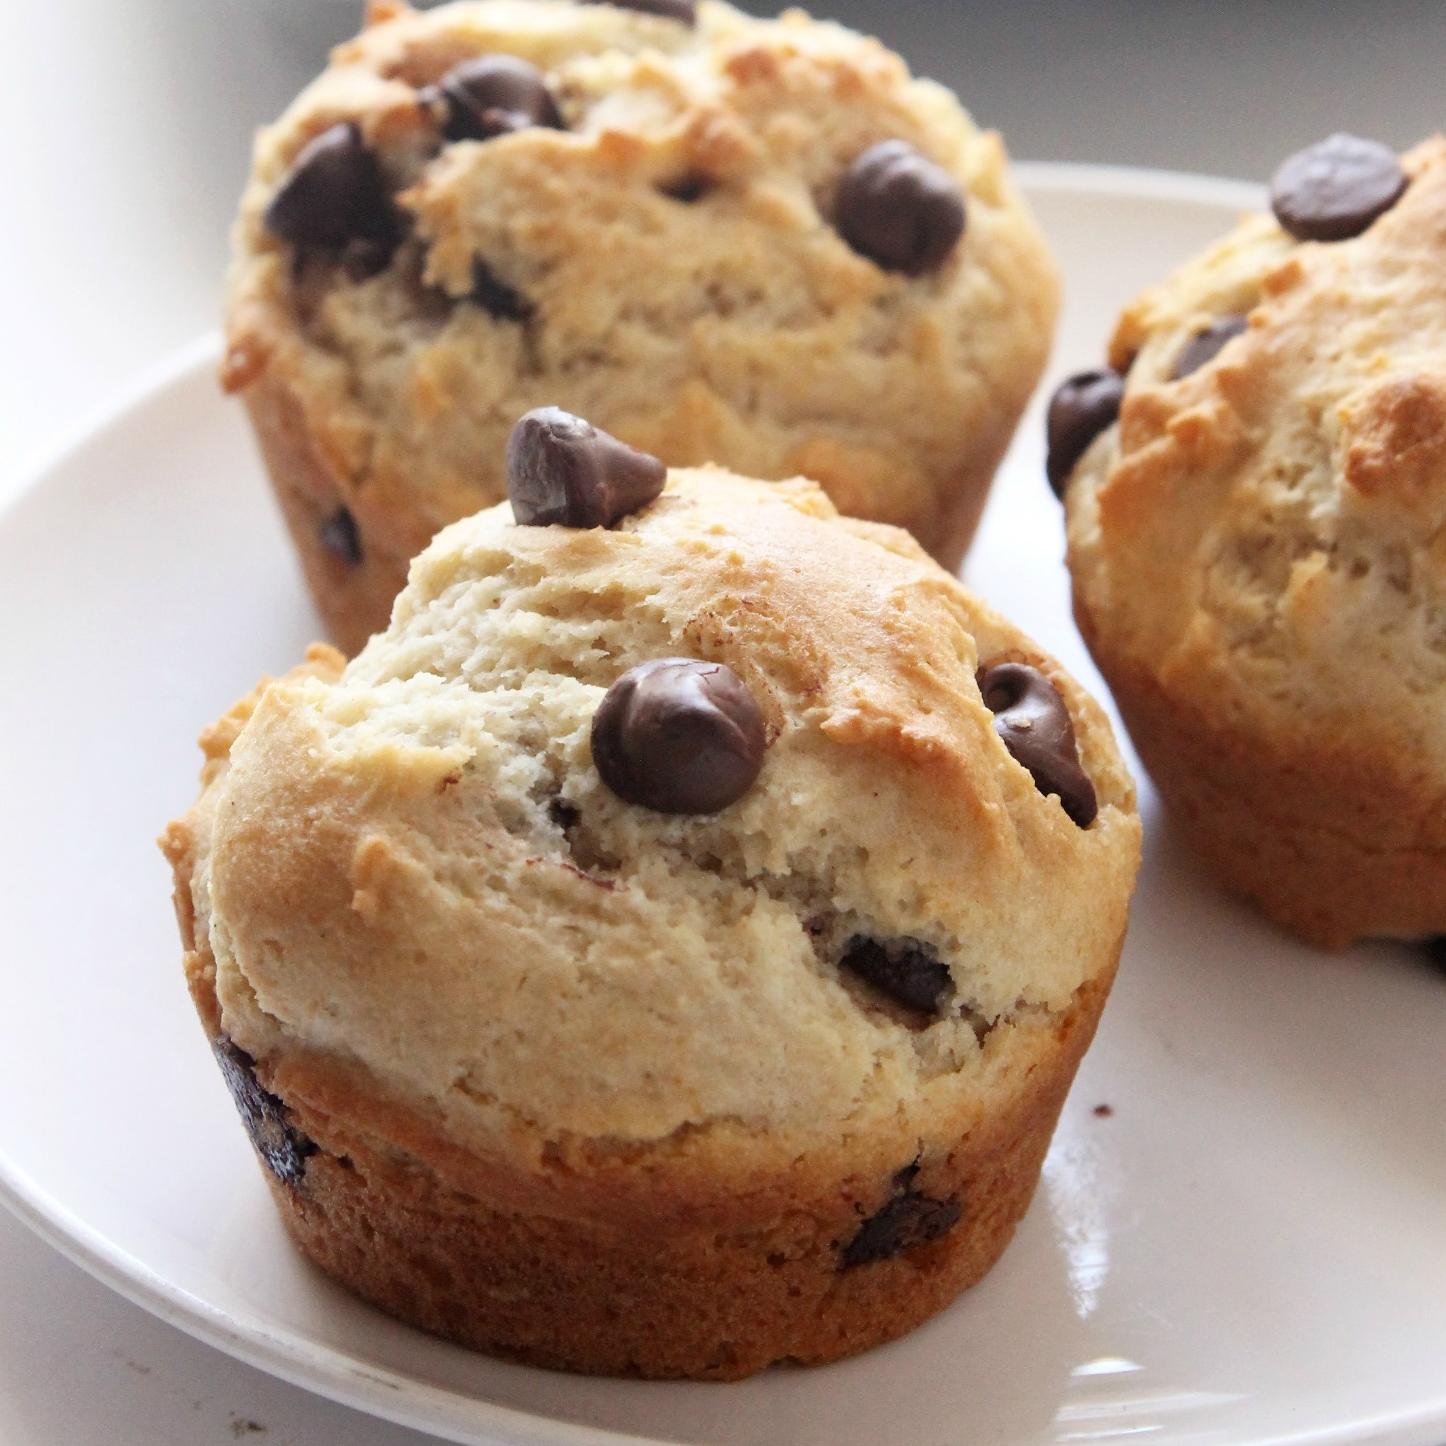  Get ready to bake a batch of these delectable gluten-free muffins and your home will smell like a bakery!